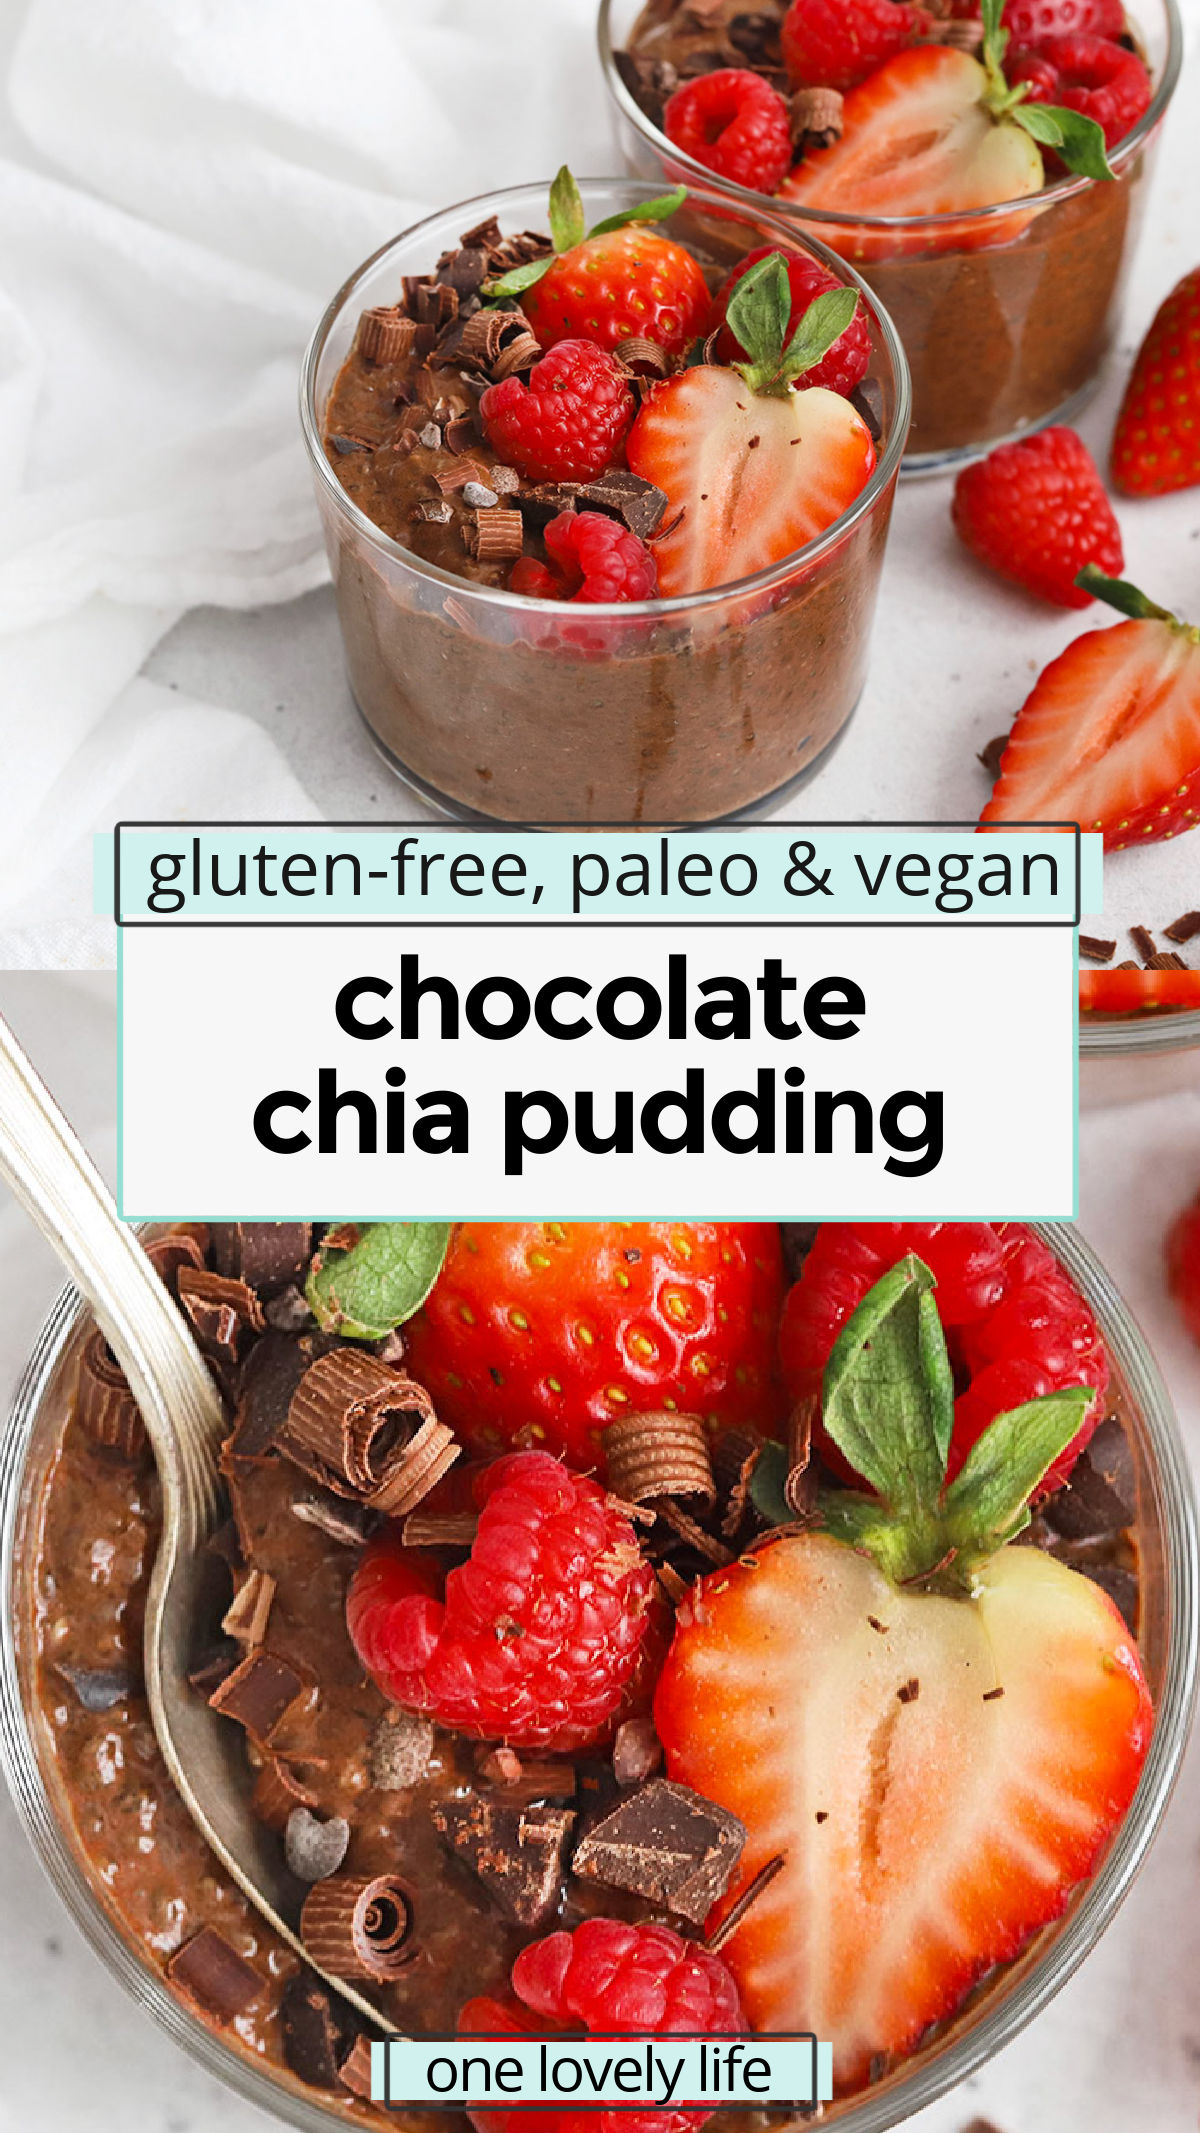 Chocolate Chia Pudding - This creamy vegan chocolate chia pudding makes a delicious healthier dessert or a decadent twist on breakfast. Serve it plain or try one of the yummy topping ideas in the post! (Vegan & Paleo) // Chocolate chia pudding recipe // healthy chocolate pudding // healthy chocolate chia pudding // vegan chocolate pudding // paleo chocolate pudding // healthy pudding // healthy dessert recipe // vegan dessert // paleo dessert // healthy Valentine's day dessert